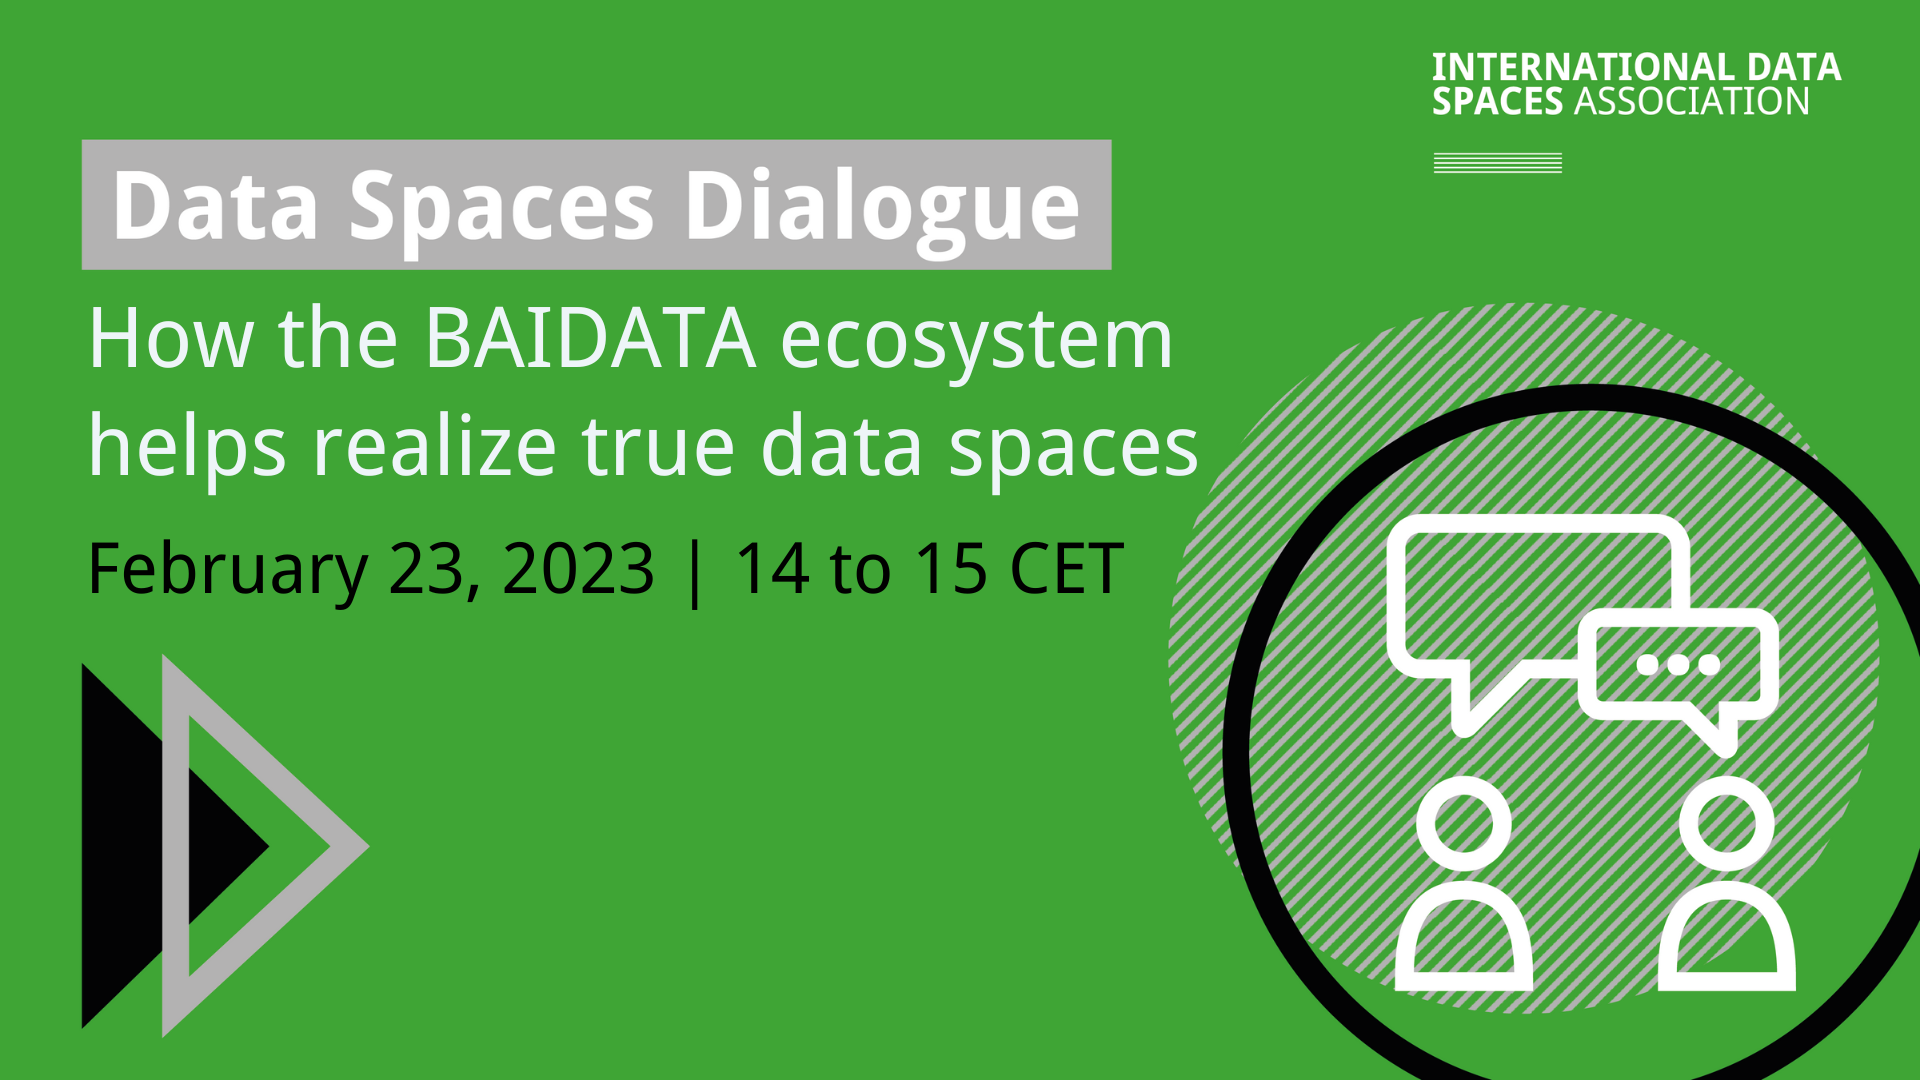 Data Spaces Dialogue | How the BAIDATA ecosystem helps realize true data spaces